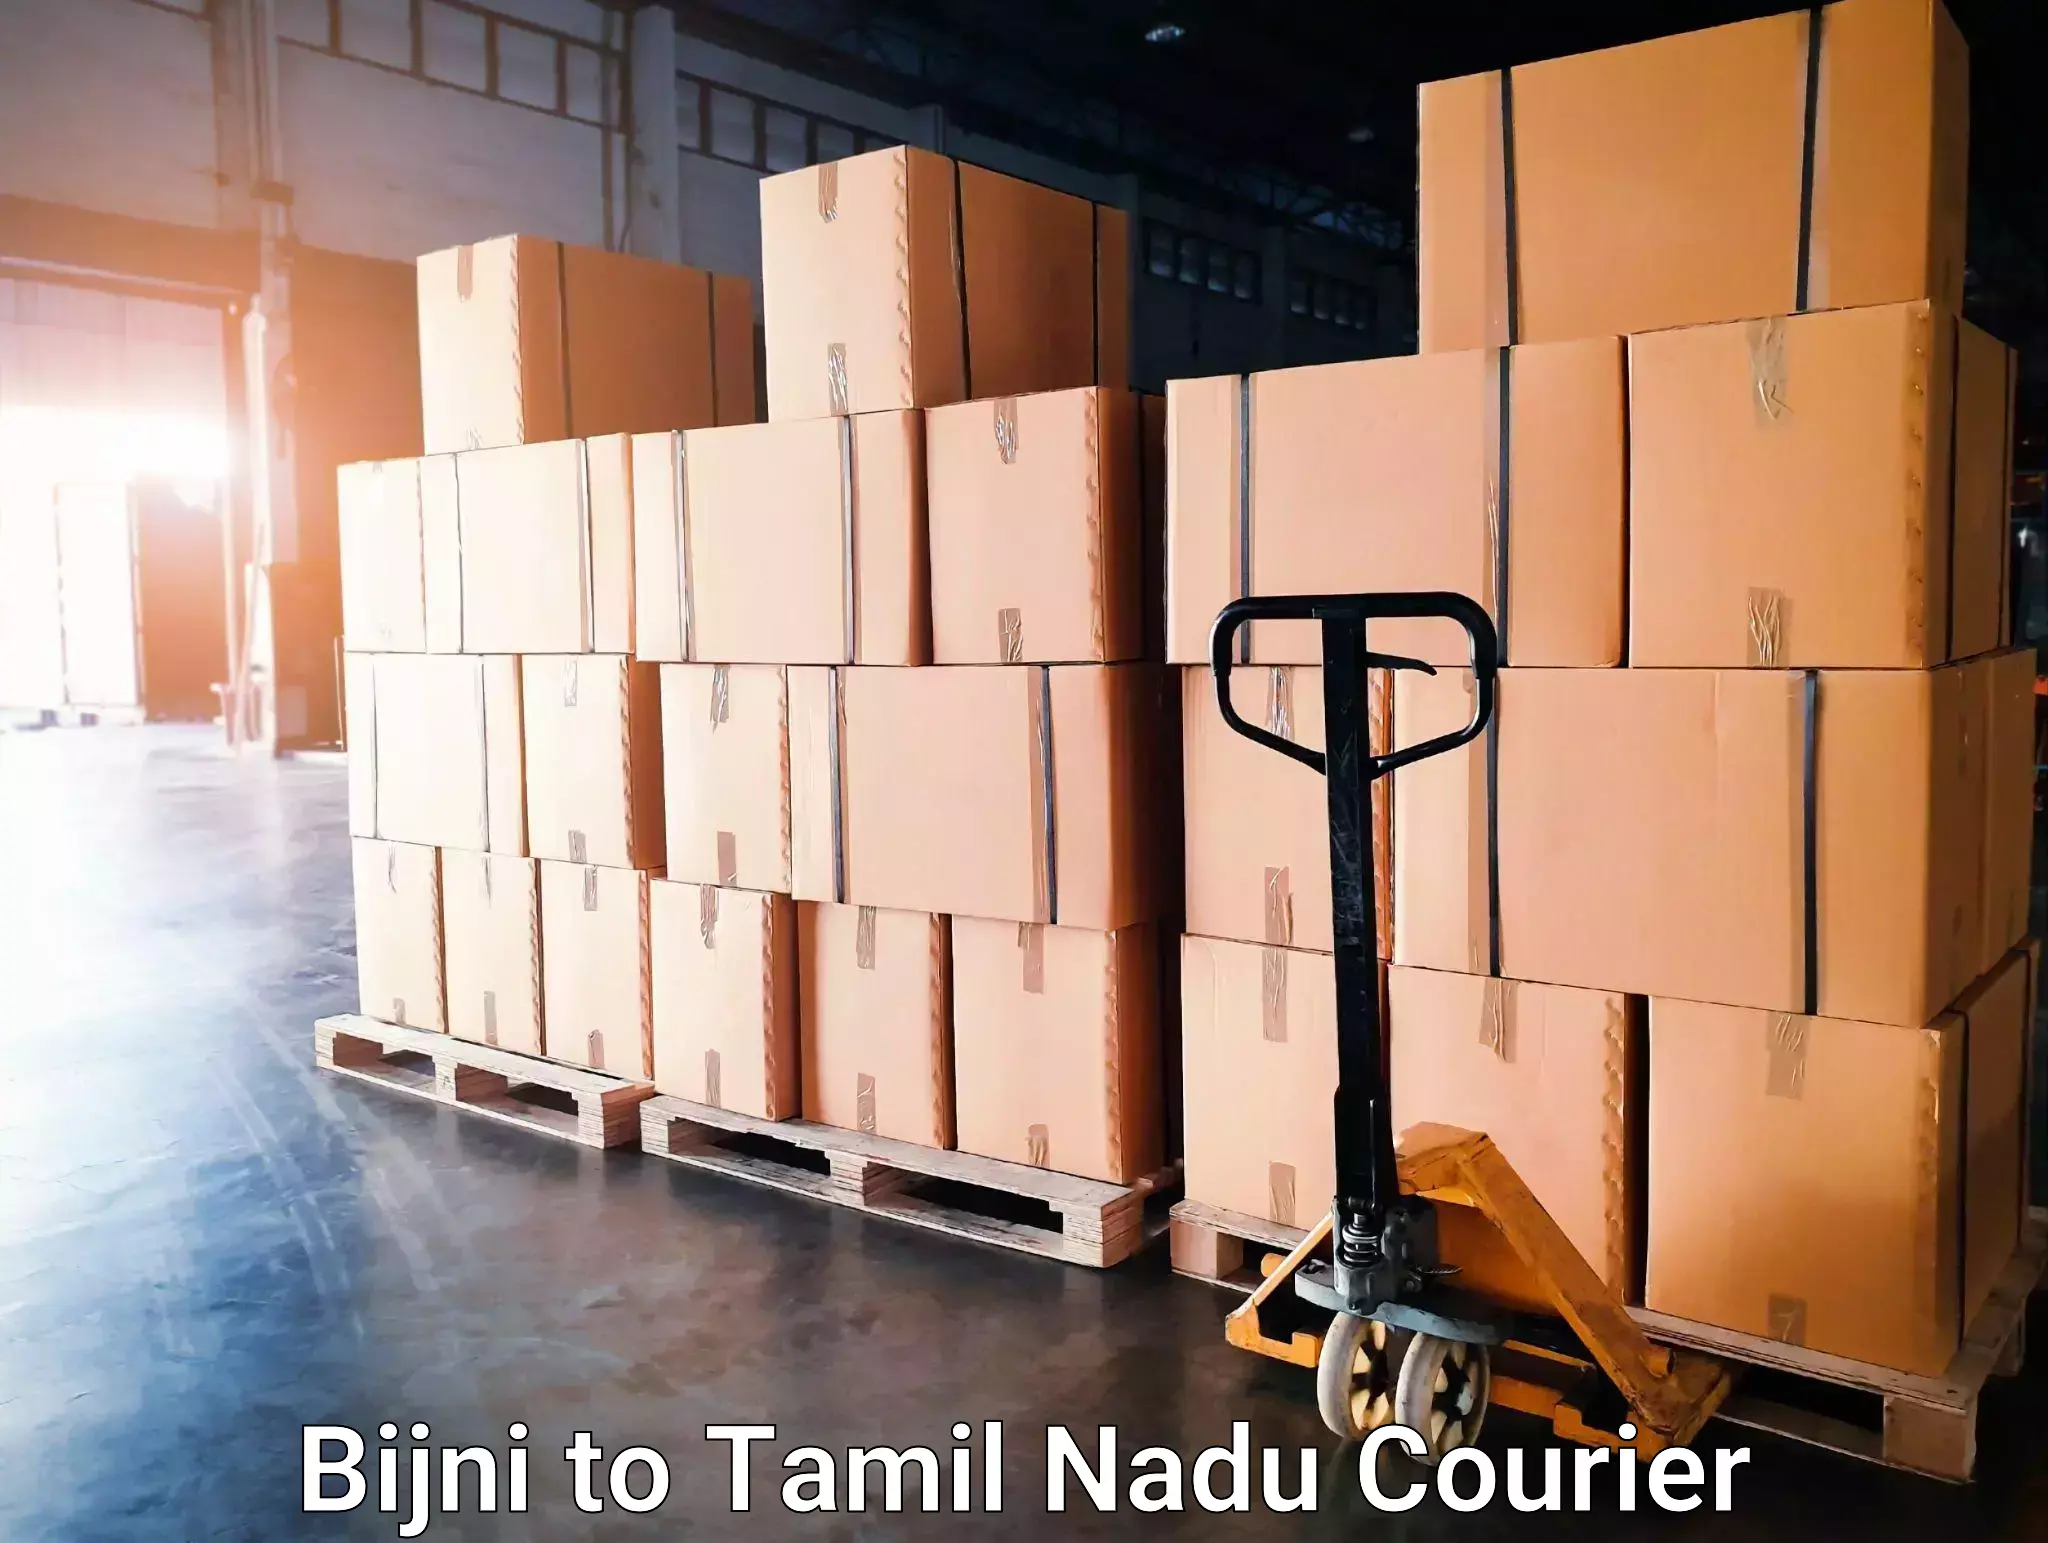 Courier service partnerships in Bijni to Peralam